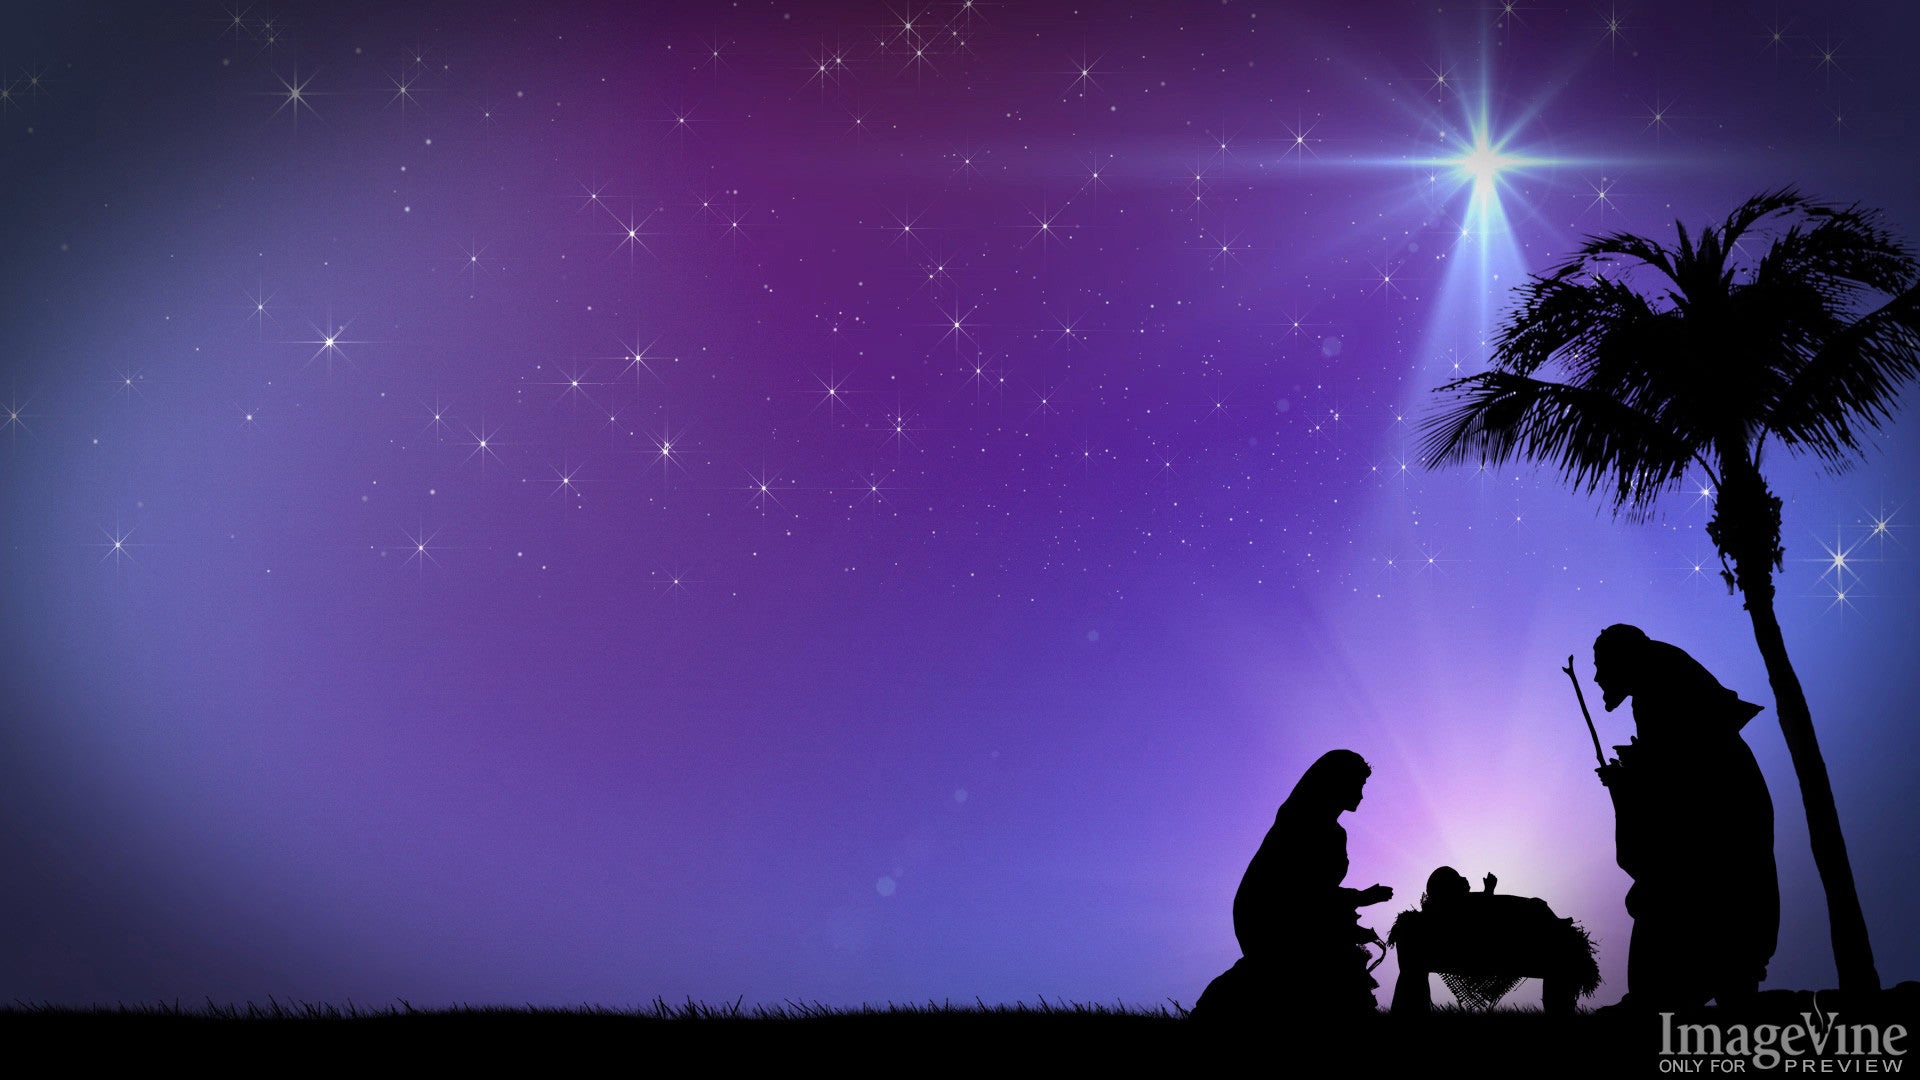 c-c-powerpoint-background-nativity-t-n-vinh-m-a-gi-ng-sinh